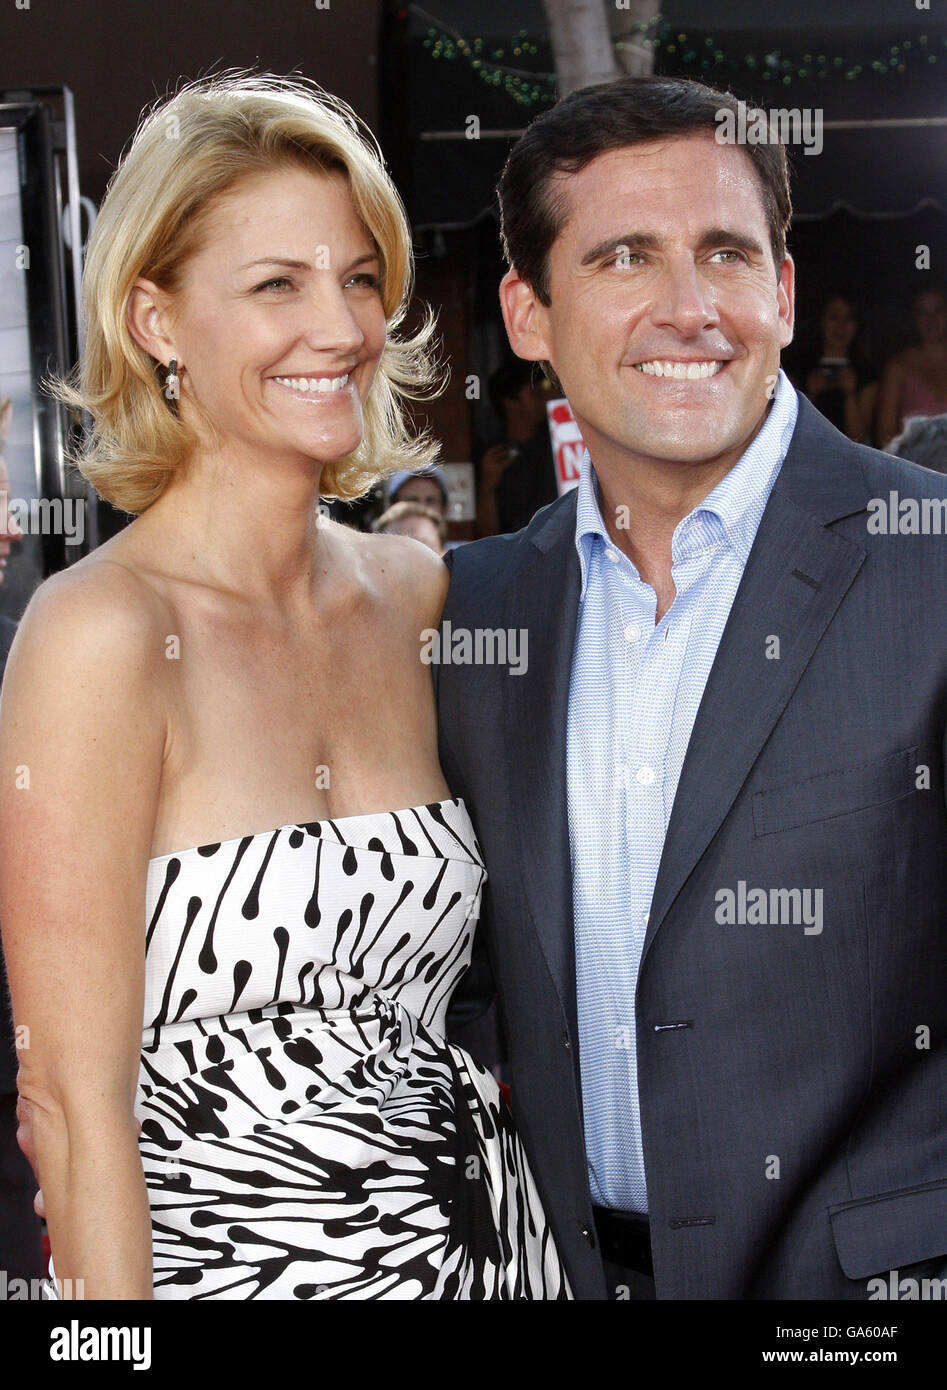 Steve Carell and wife Nancy Walls at the World Premiere of "Get Smart" held at the Mann Village Theater in Westwood, California, Credit: Hyperstar/Alamy Stock Photo